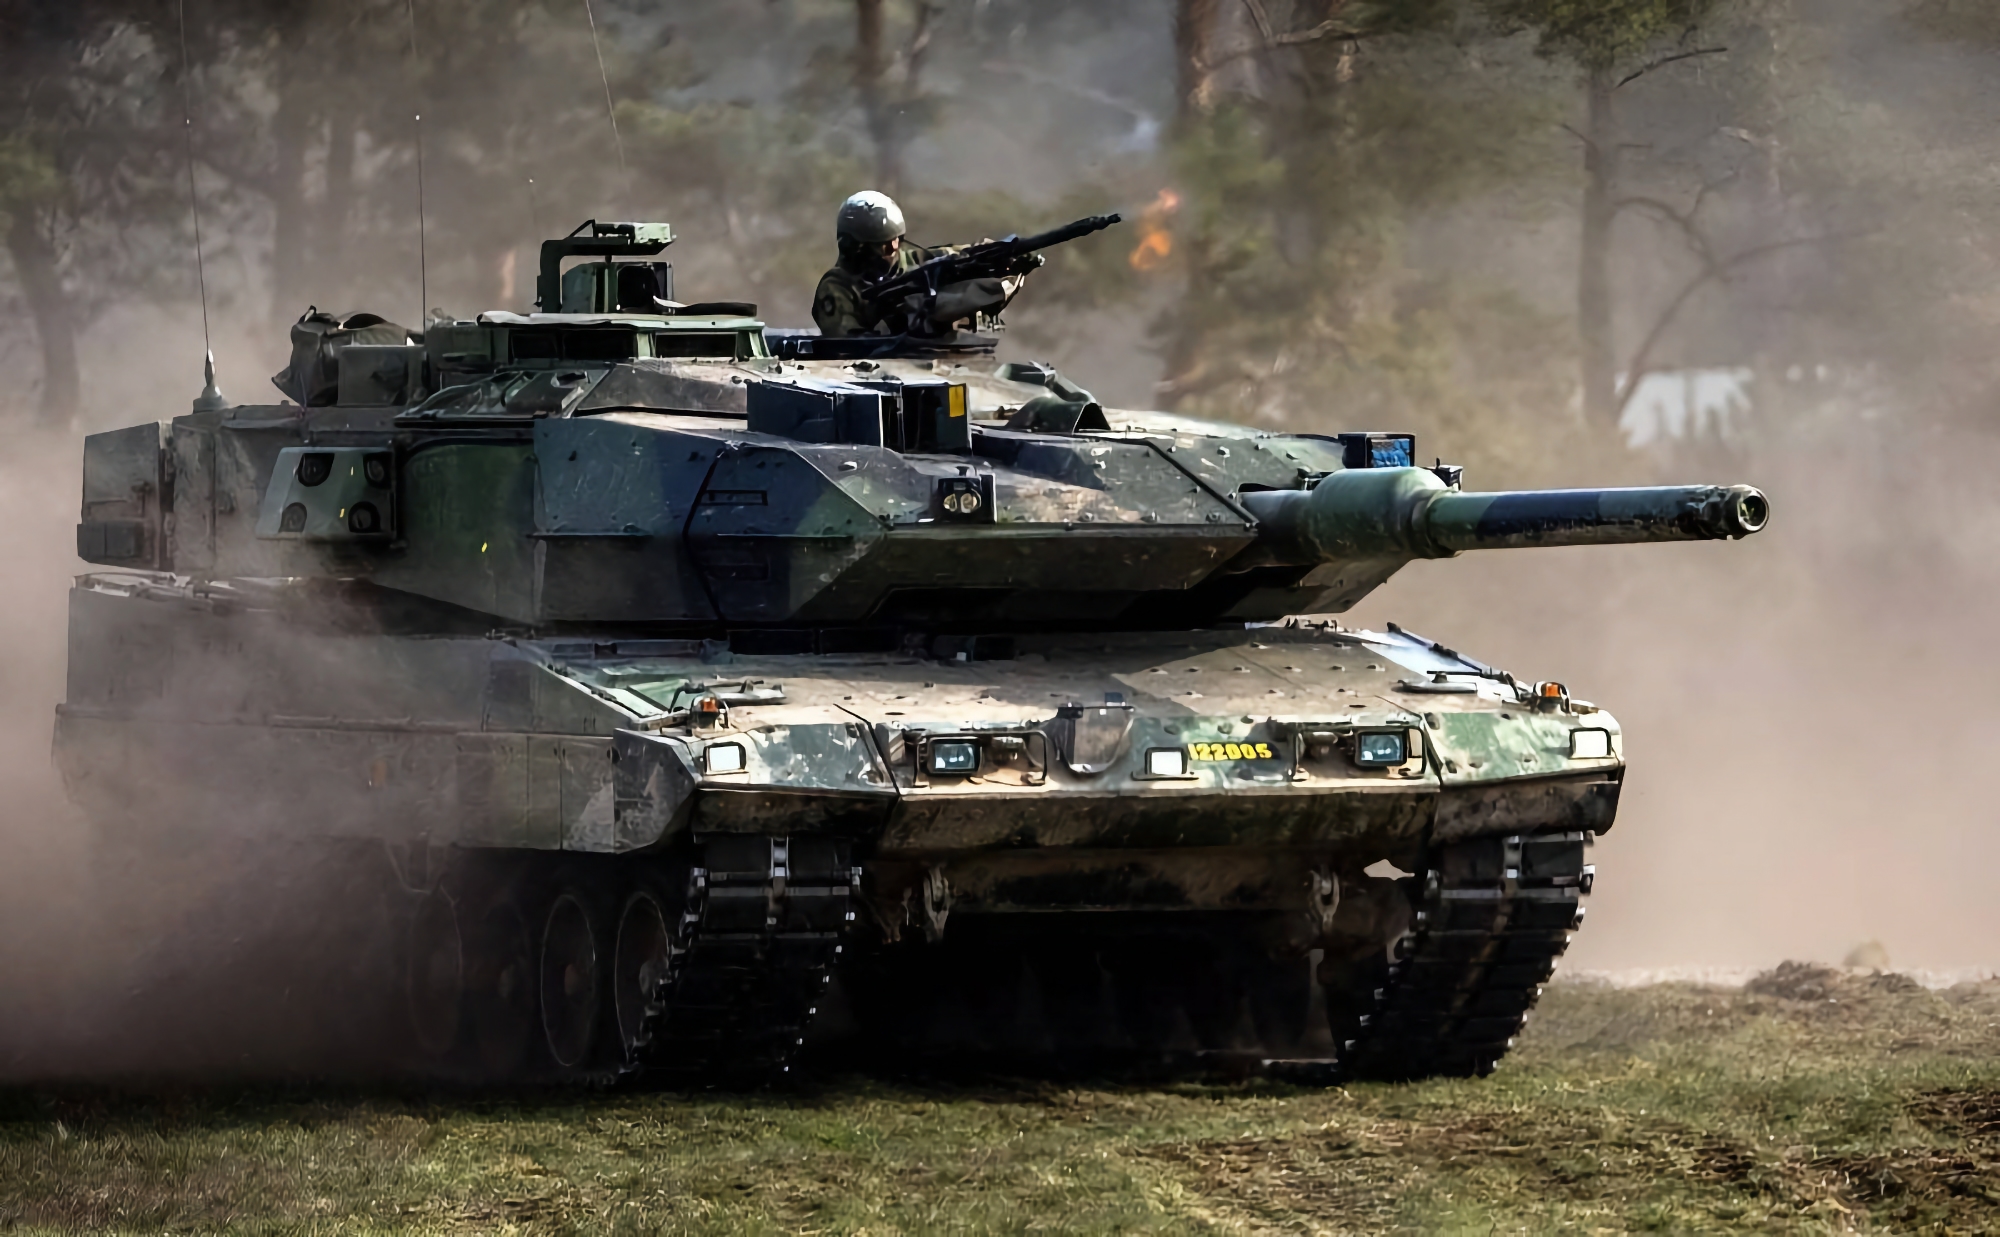 Sweden will transfer a new military aid package to Ukraine, including ammunition for CV90 infantry fighting vehicles and Stridsvagn 122 (aka Leopard 2A5) tanks